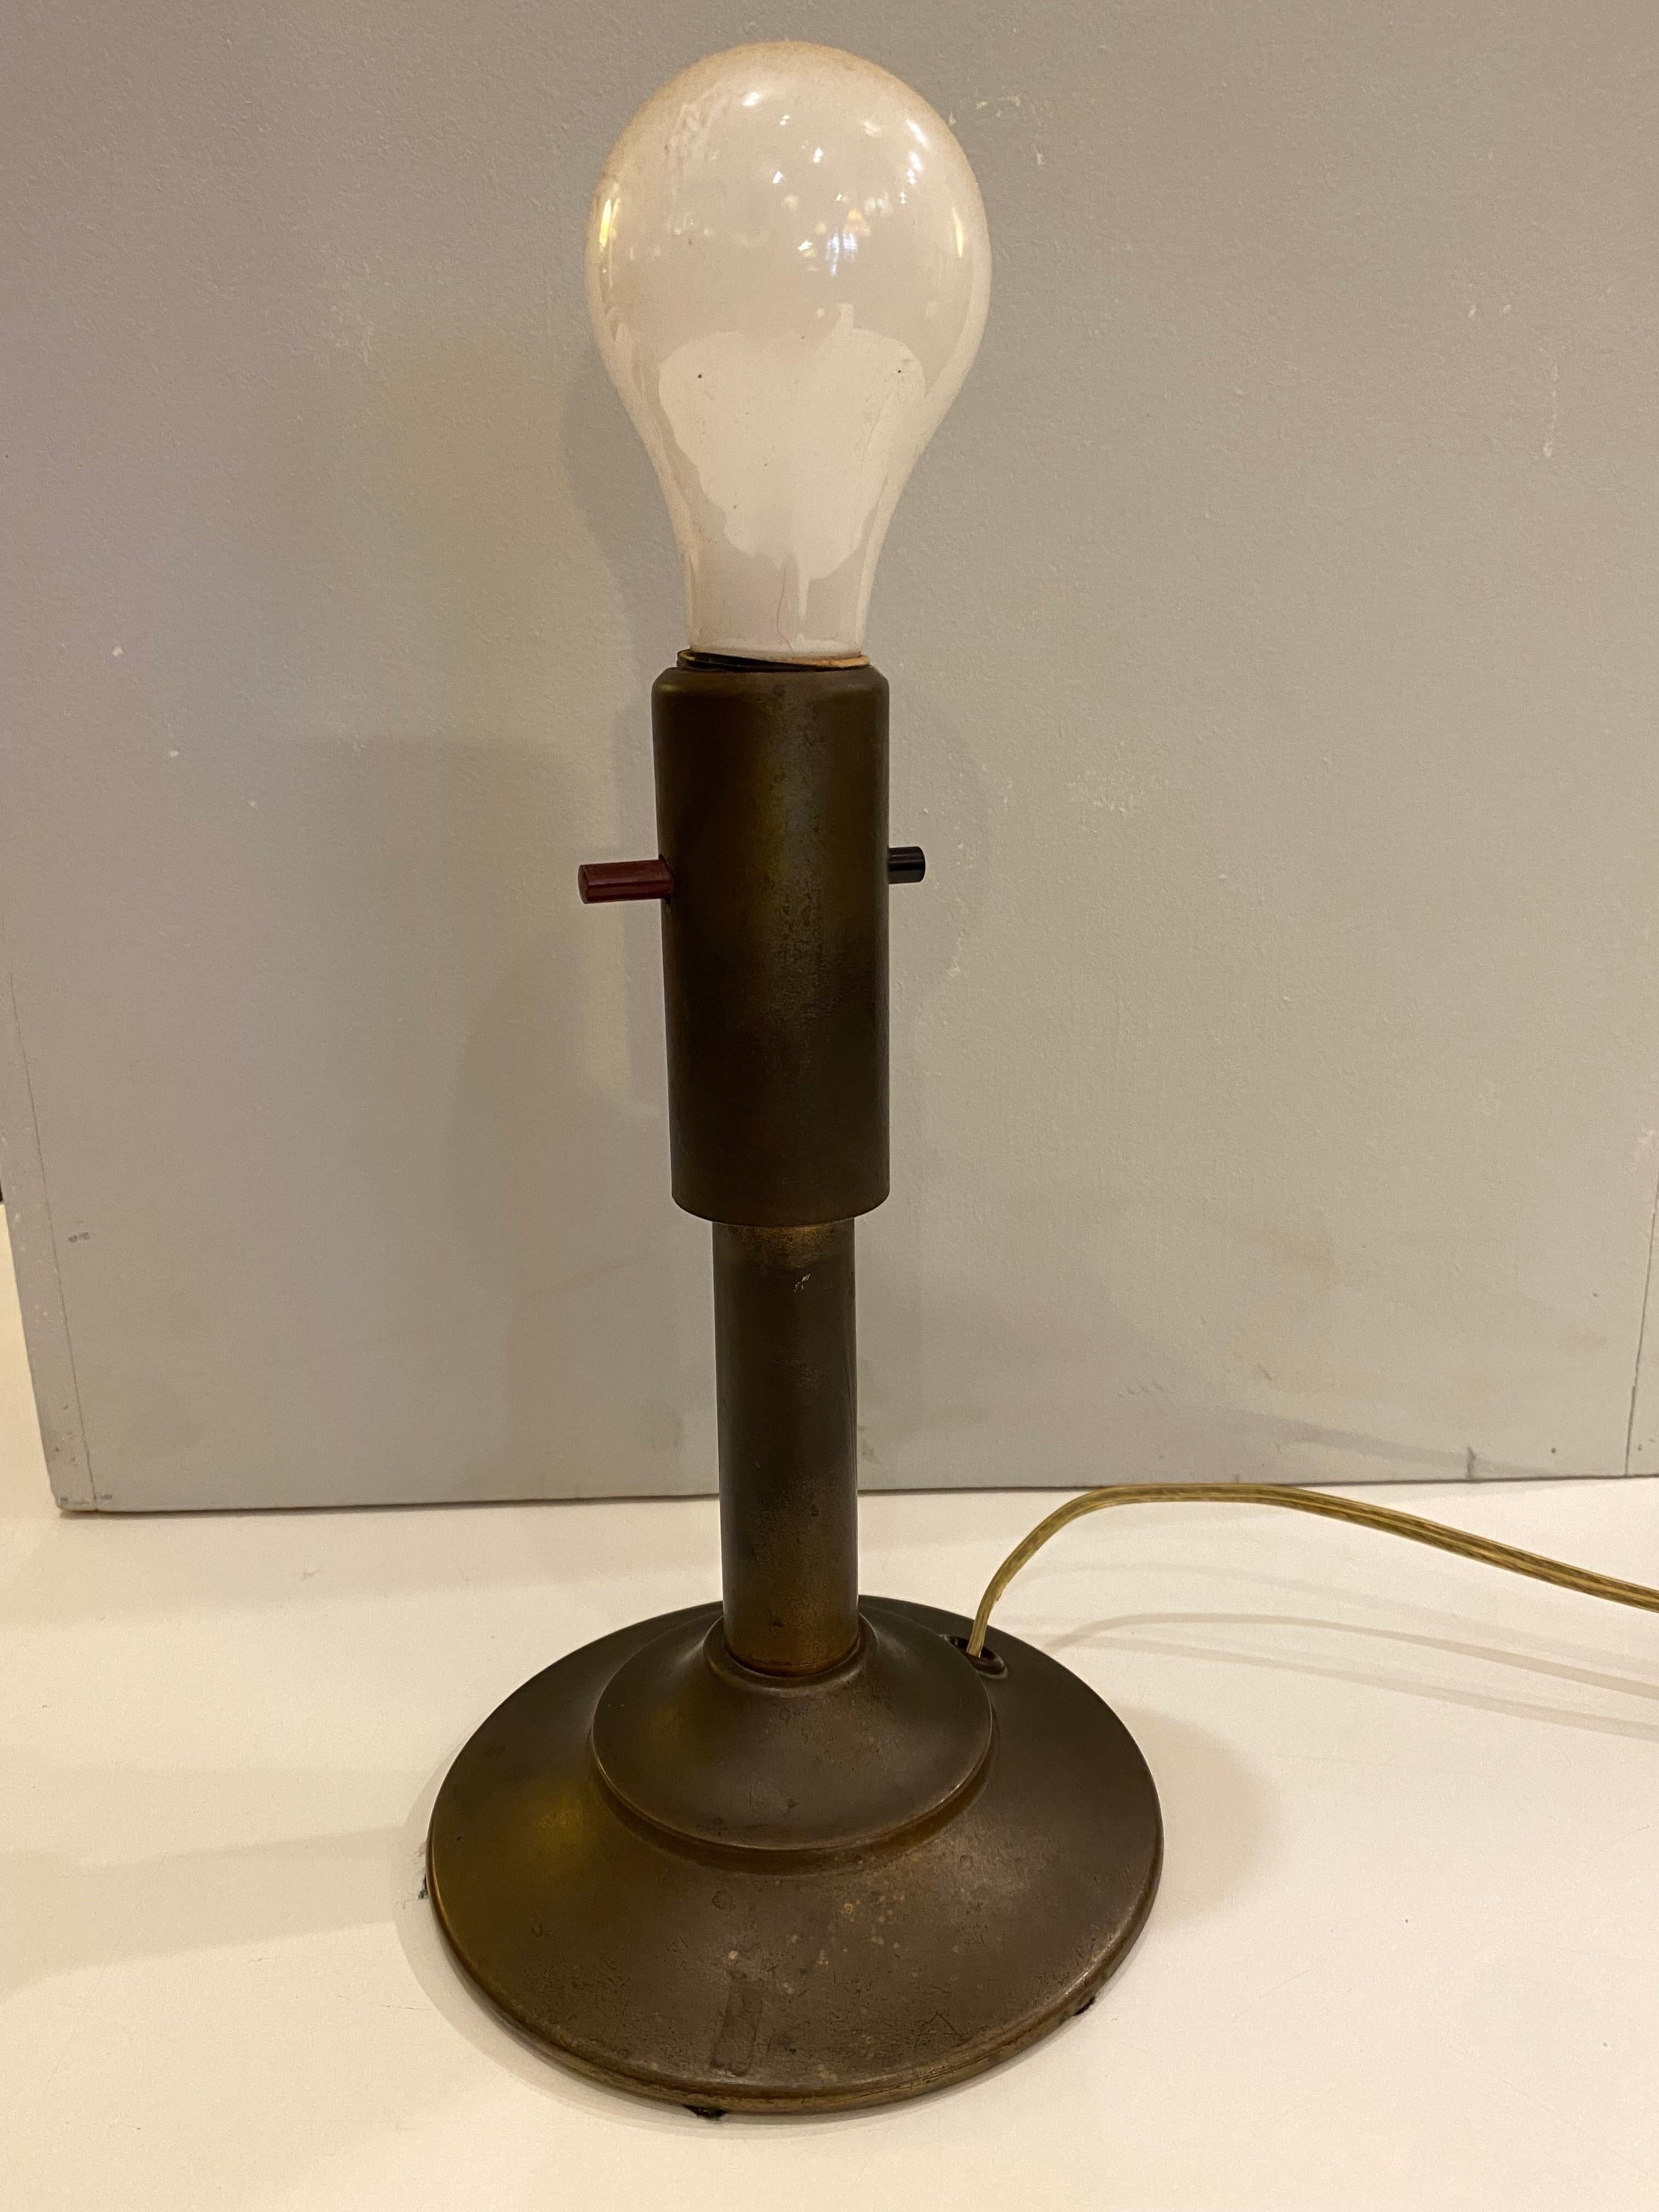 LeRoy C. Doane for The Miller Lamp Company Pagoda Table Lamp.  For years it was said this lamp was designed by Kem Weber.  This Lamp is very Original!  Retains all it's original applied Patina!  Peach Color Frosted Glass Top in Excellent Condition! 